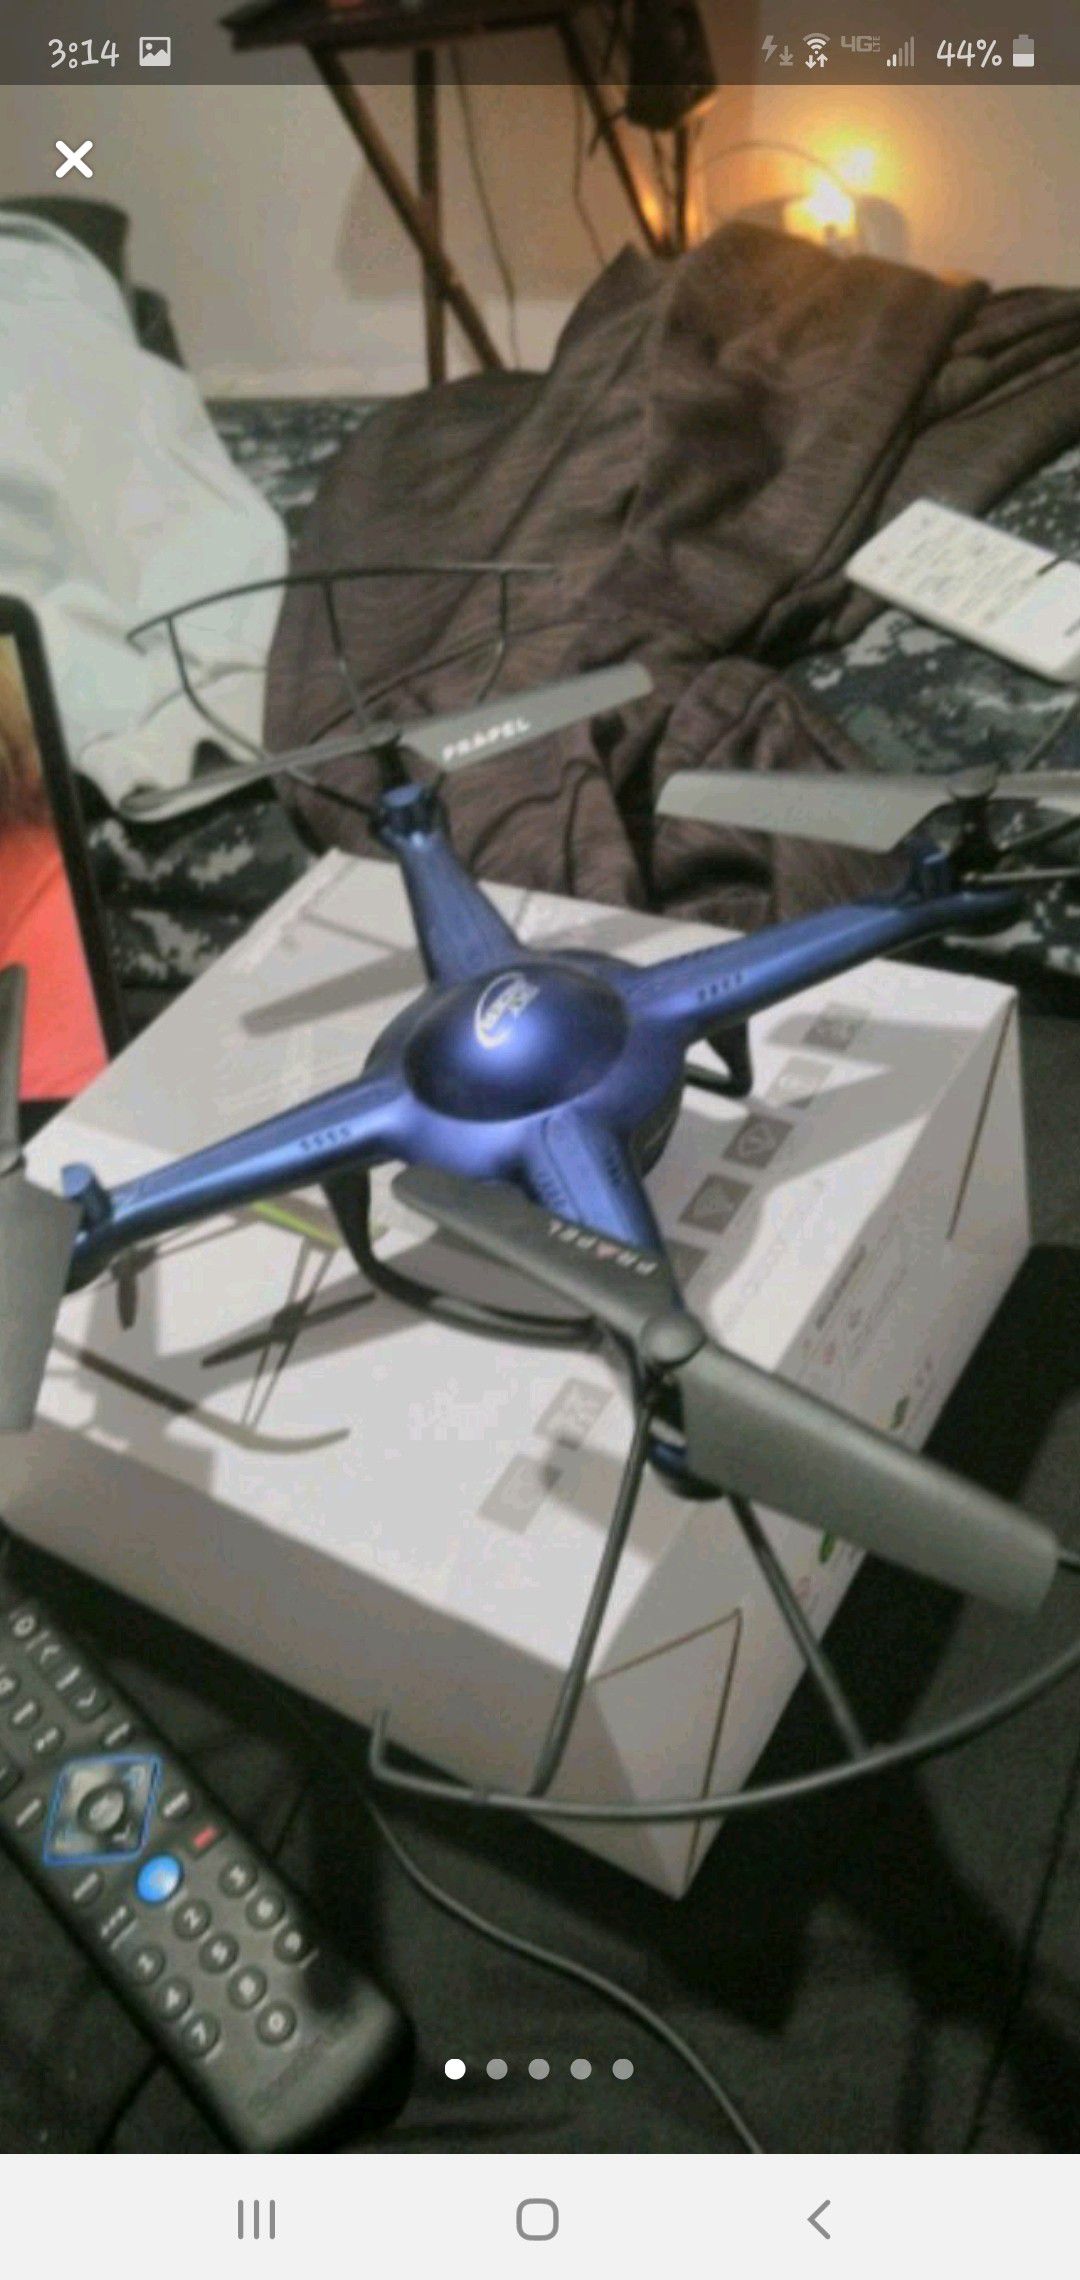 2 brand new drones with video camera